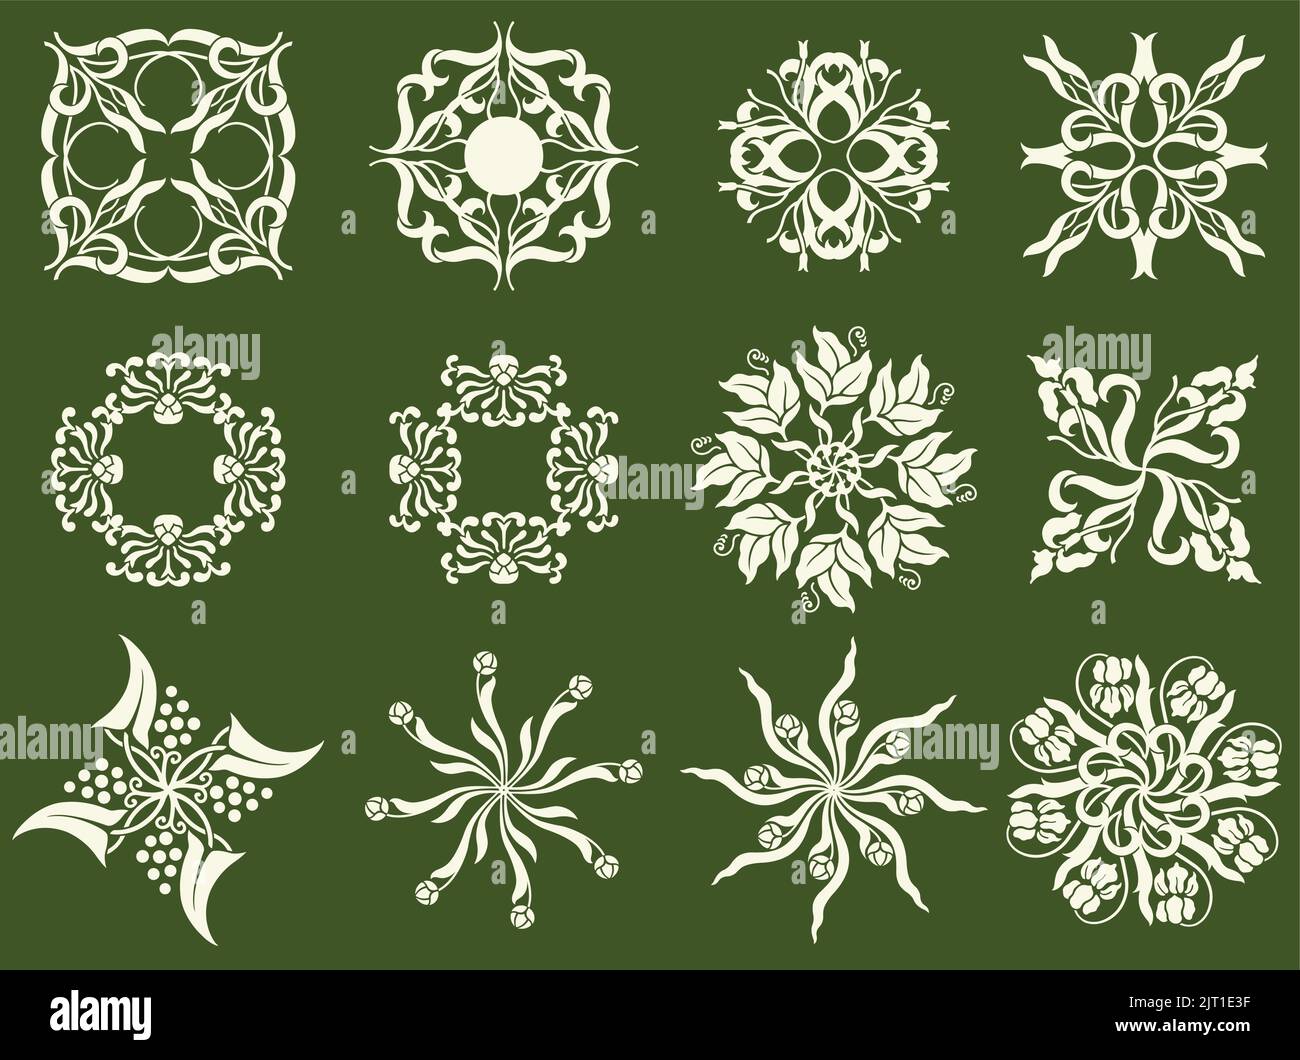 A set of vintage vector decorative Spring flower decorative icons. Stock Vector